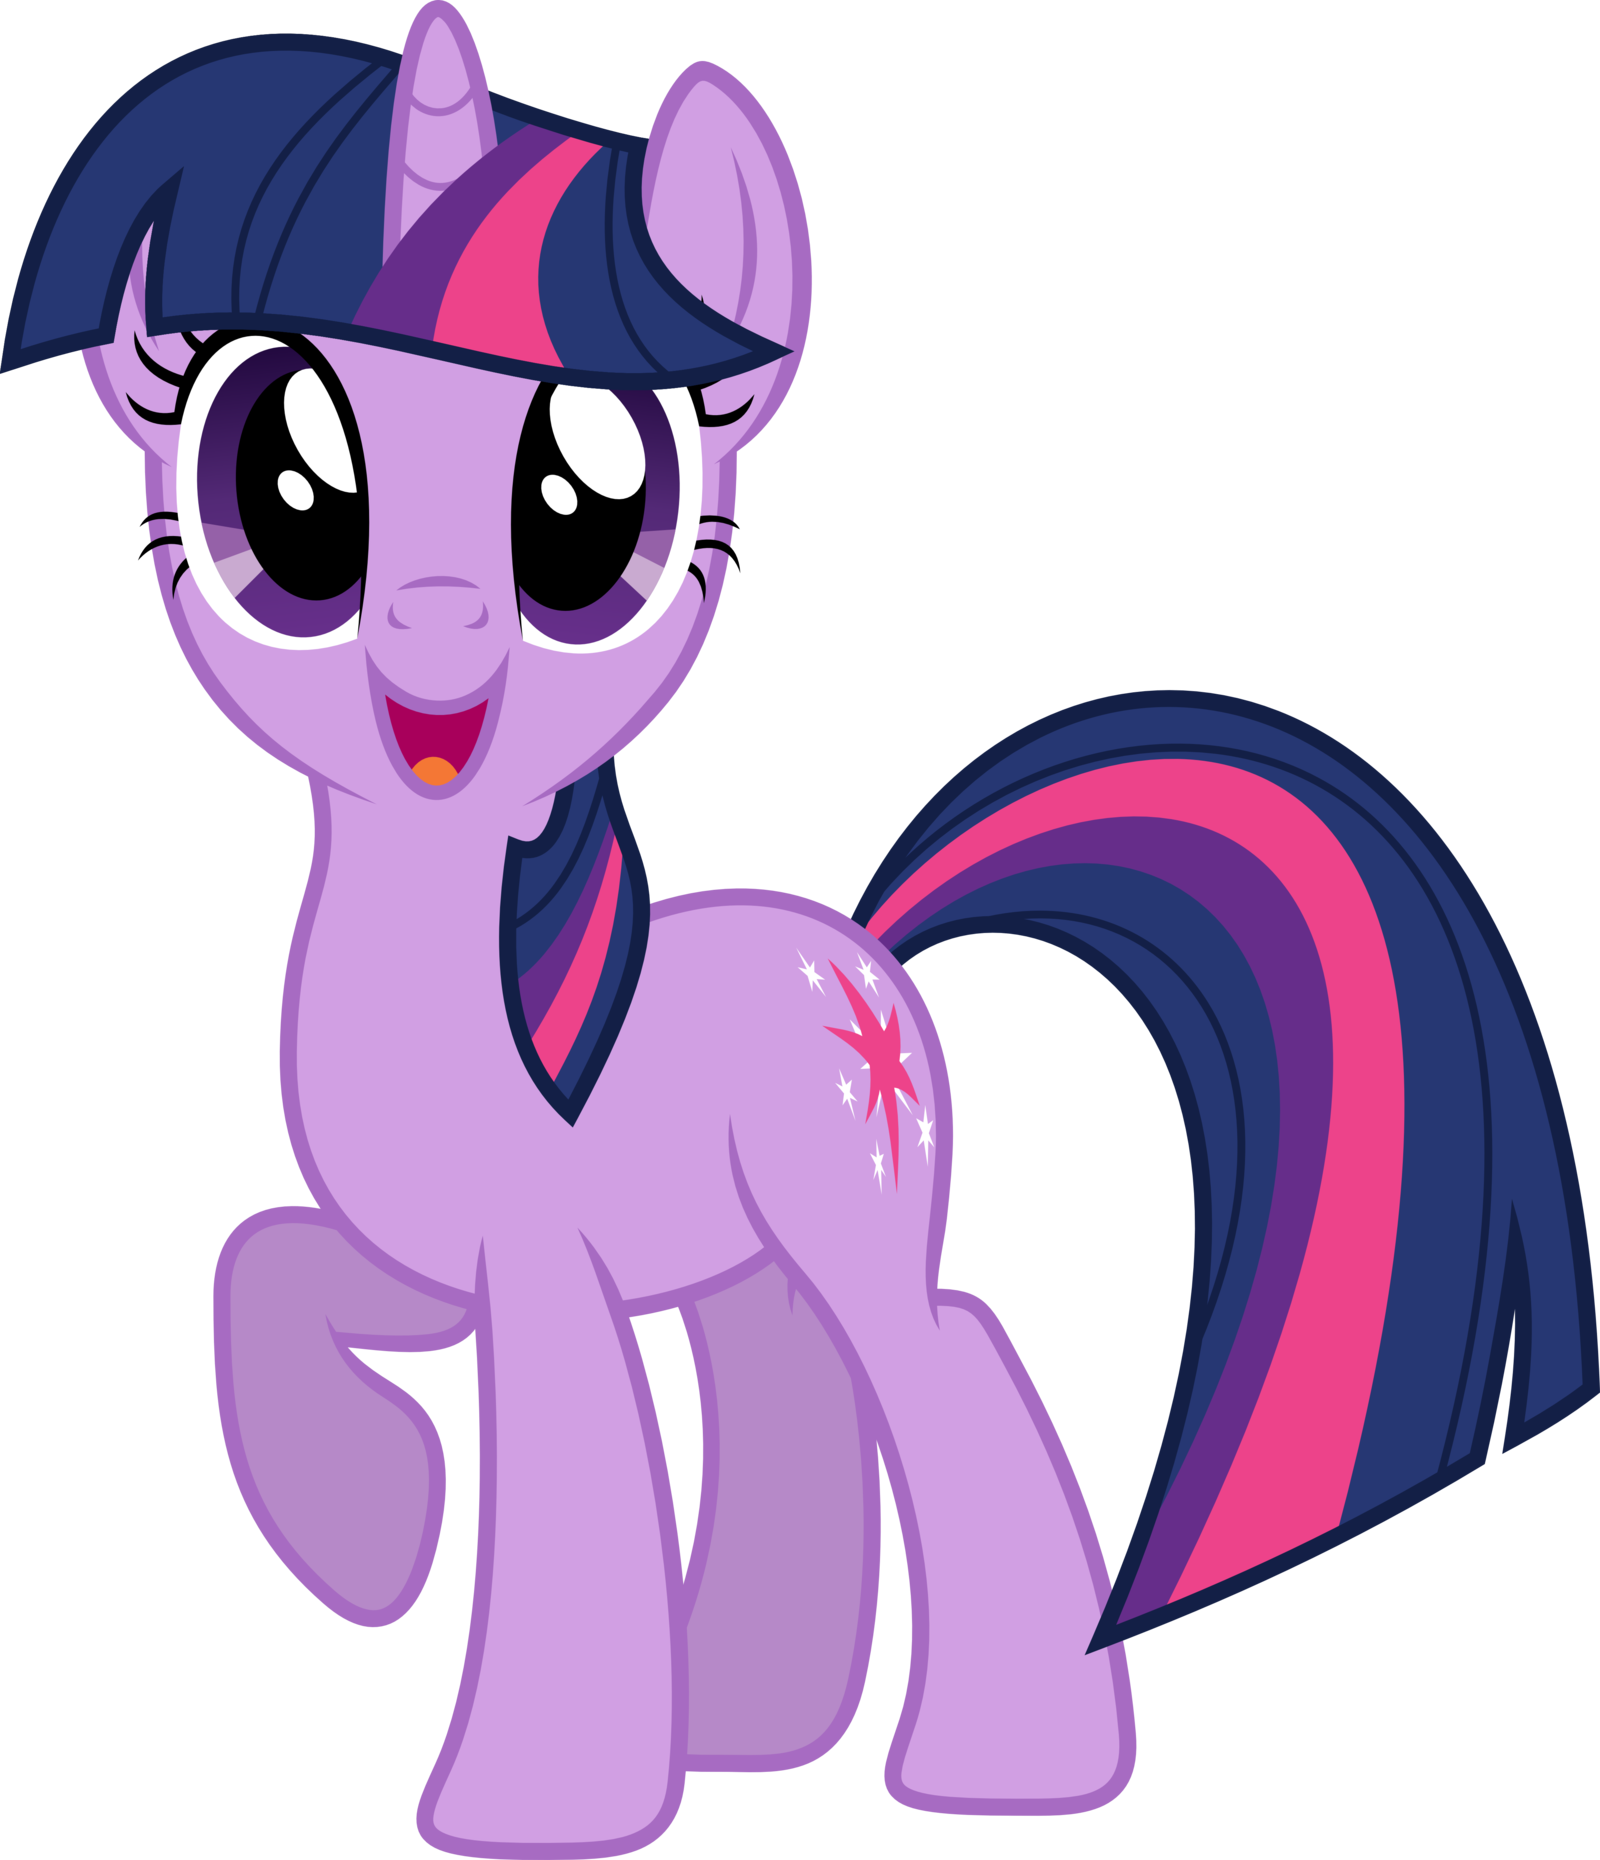 Check out this transparent My Little Pony Twilight Sparkle PNG image